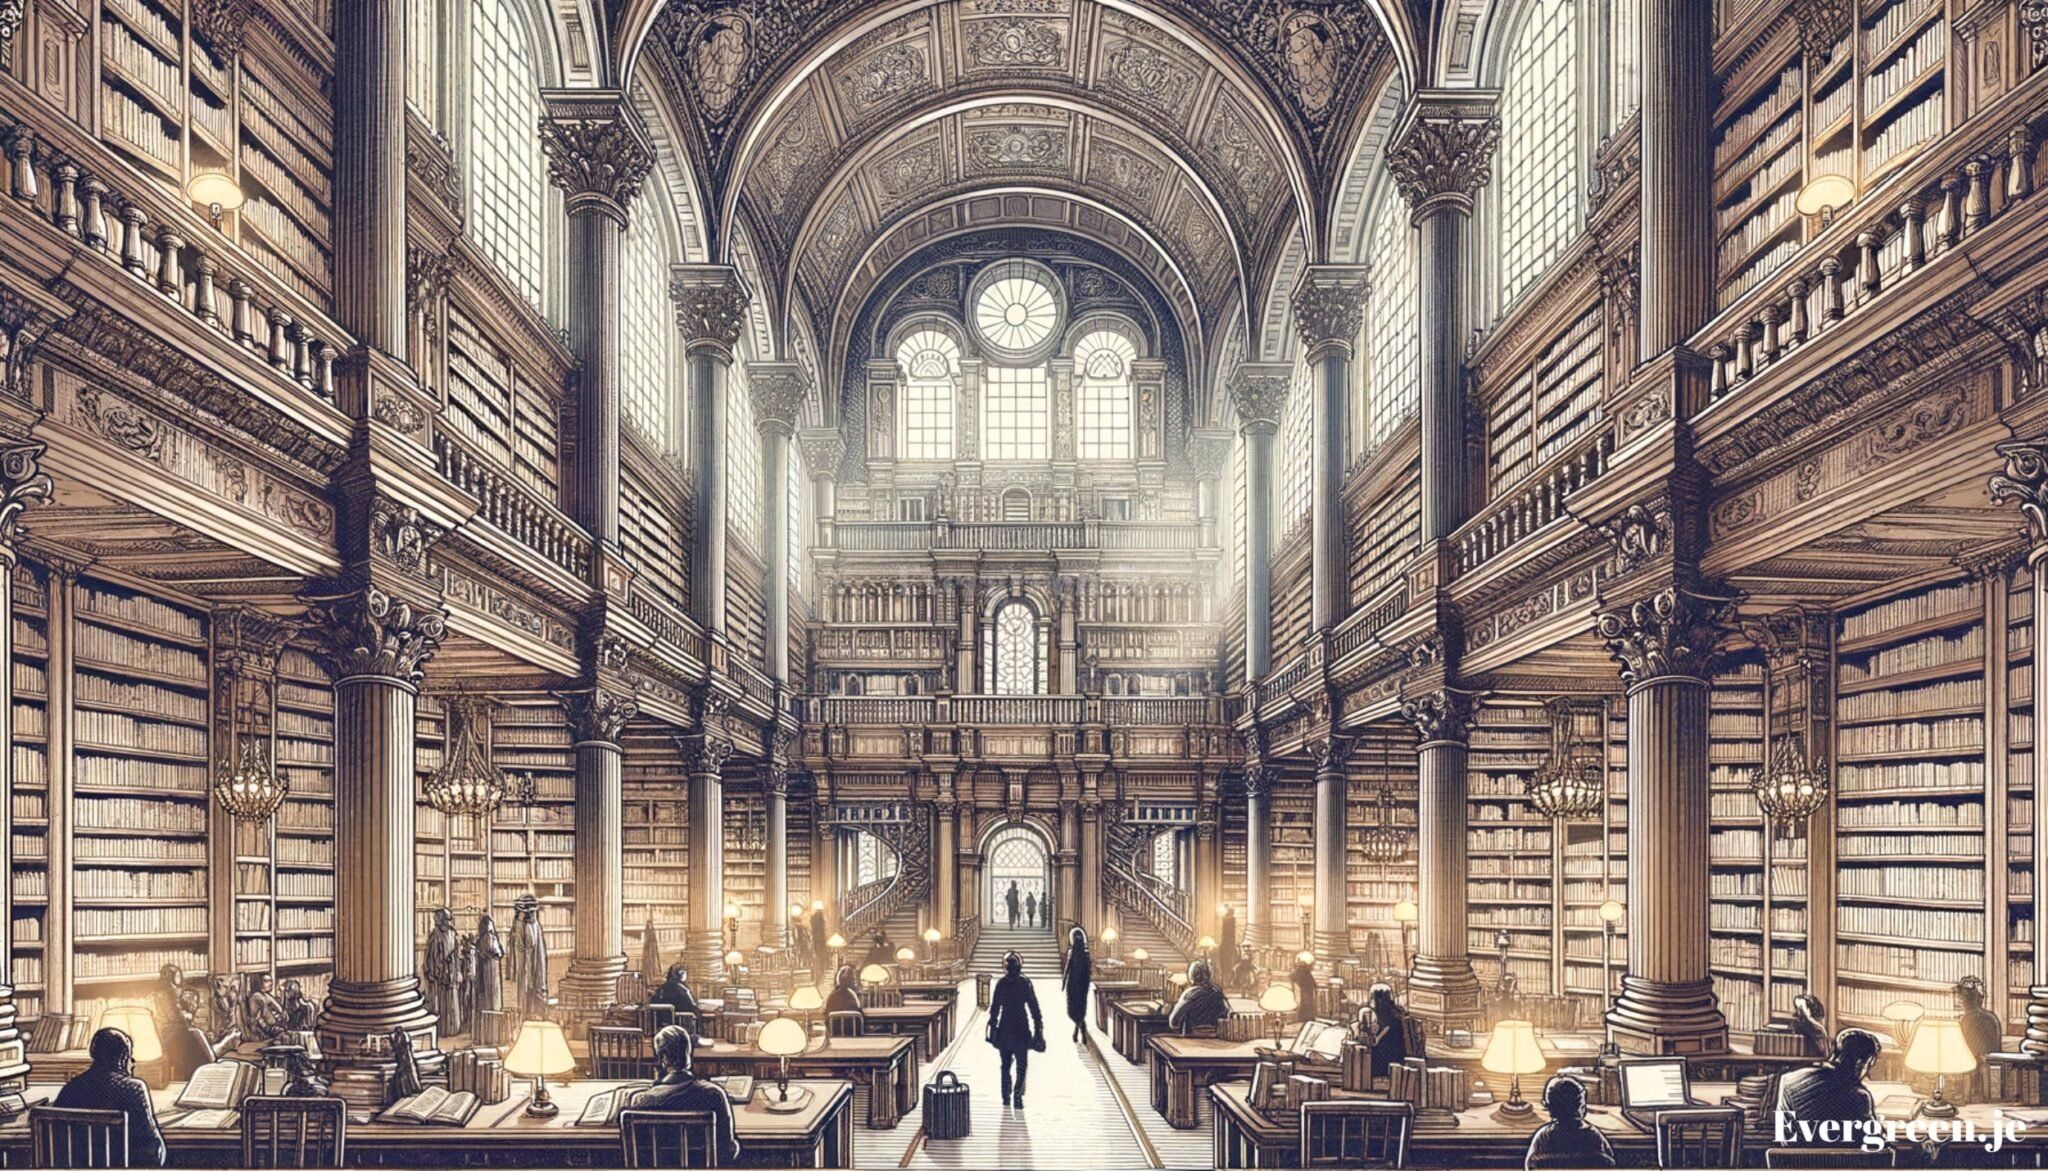 Freedom of knowledge with open source software and privacy respecting services hand drawn illustration in a 16 9 aspect ratio that is inspired by the worlds most magnificent libraries